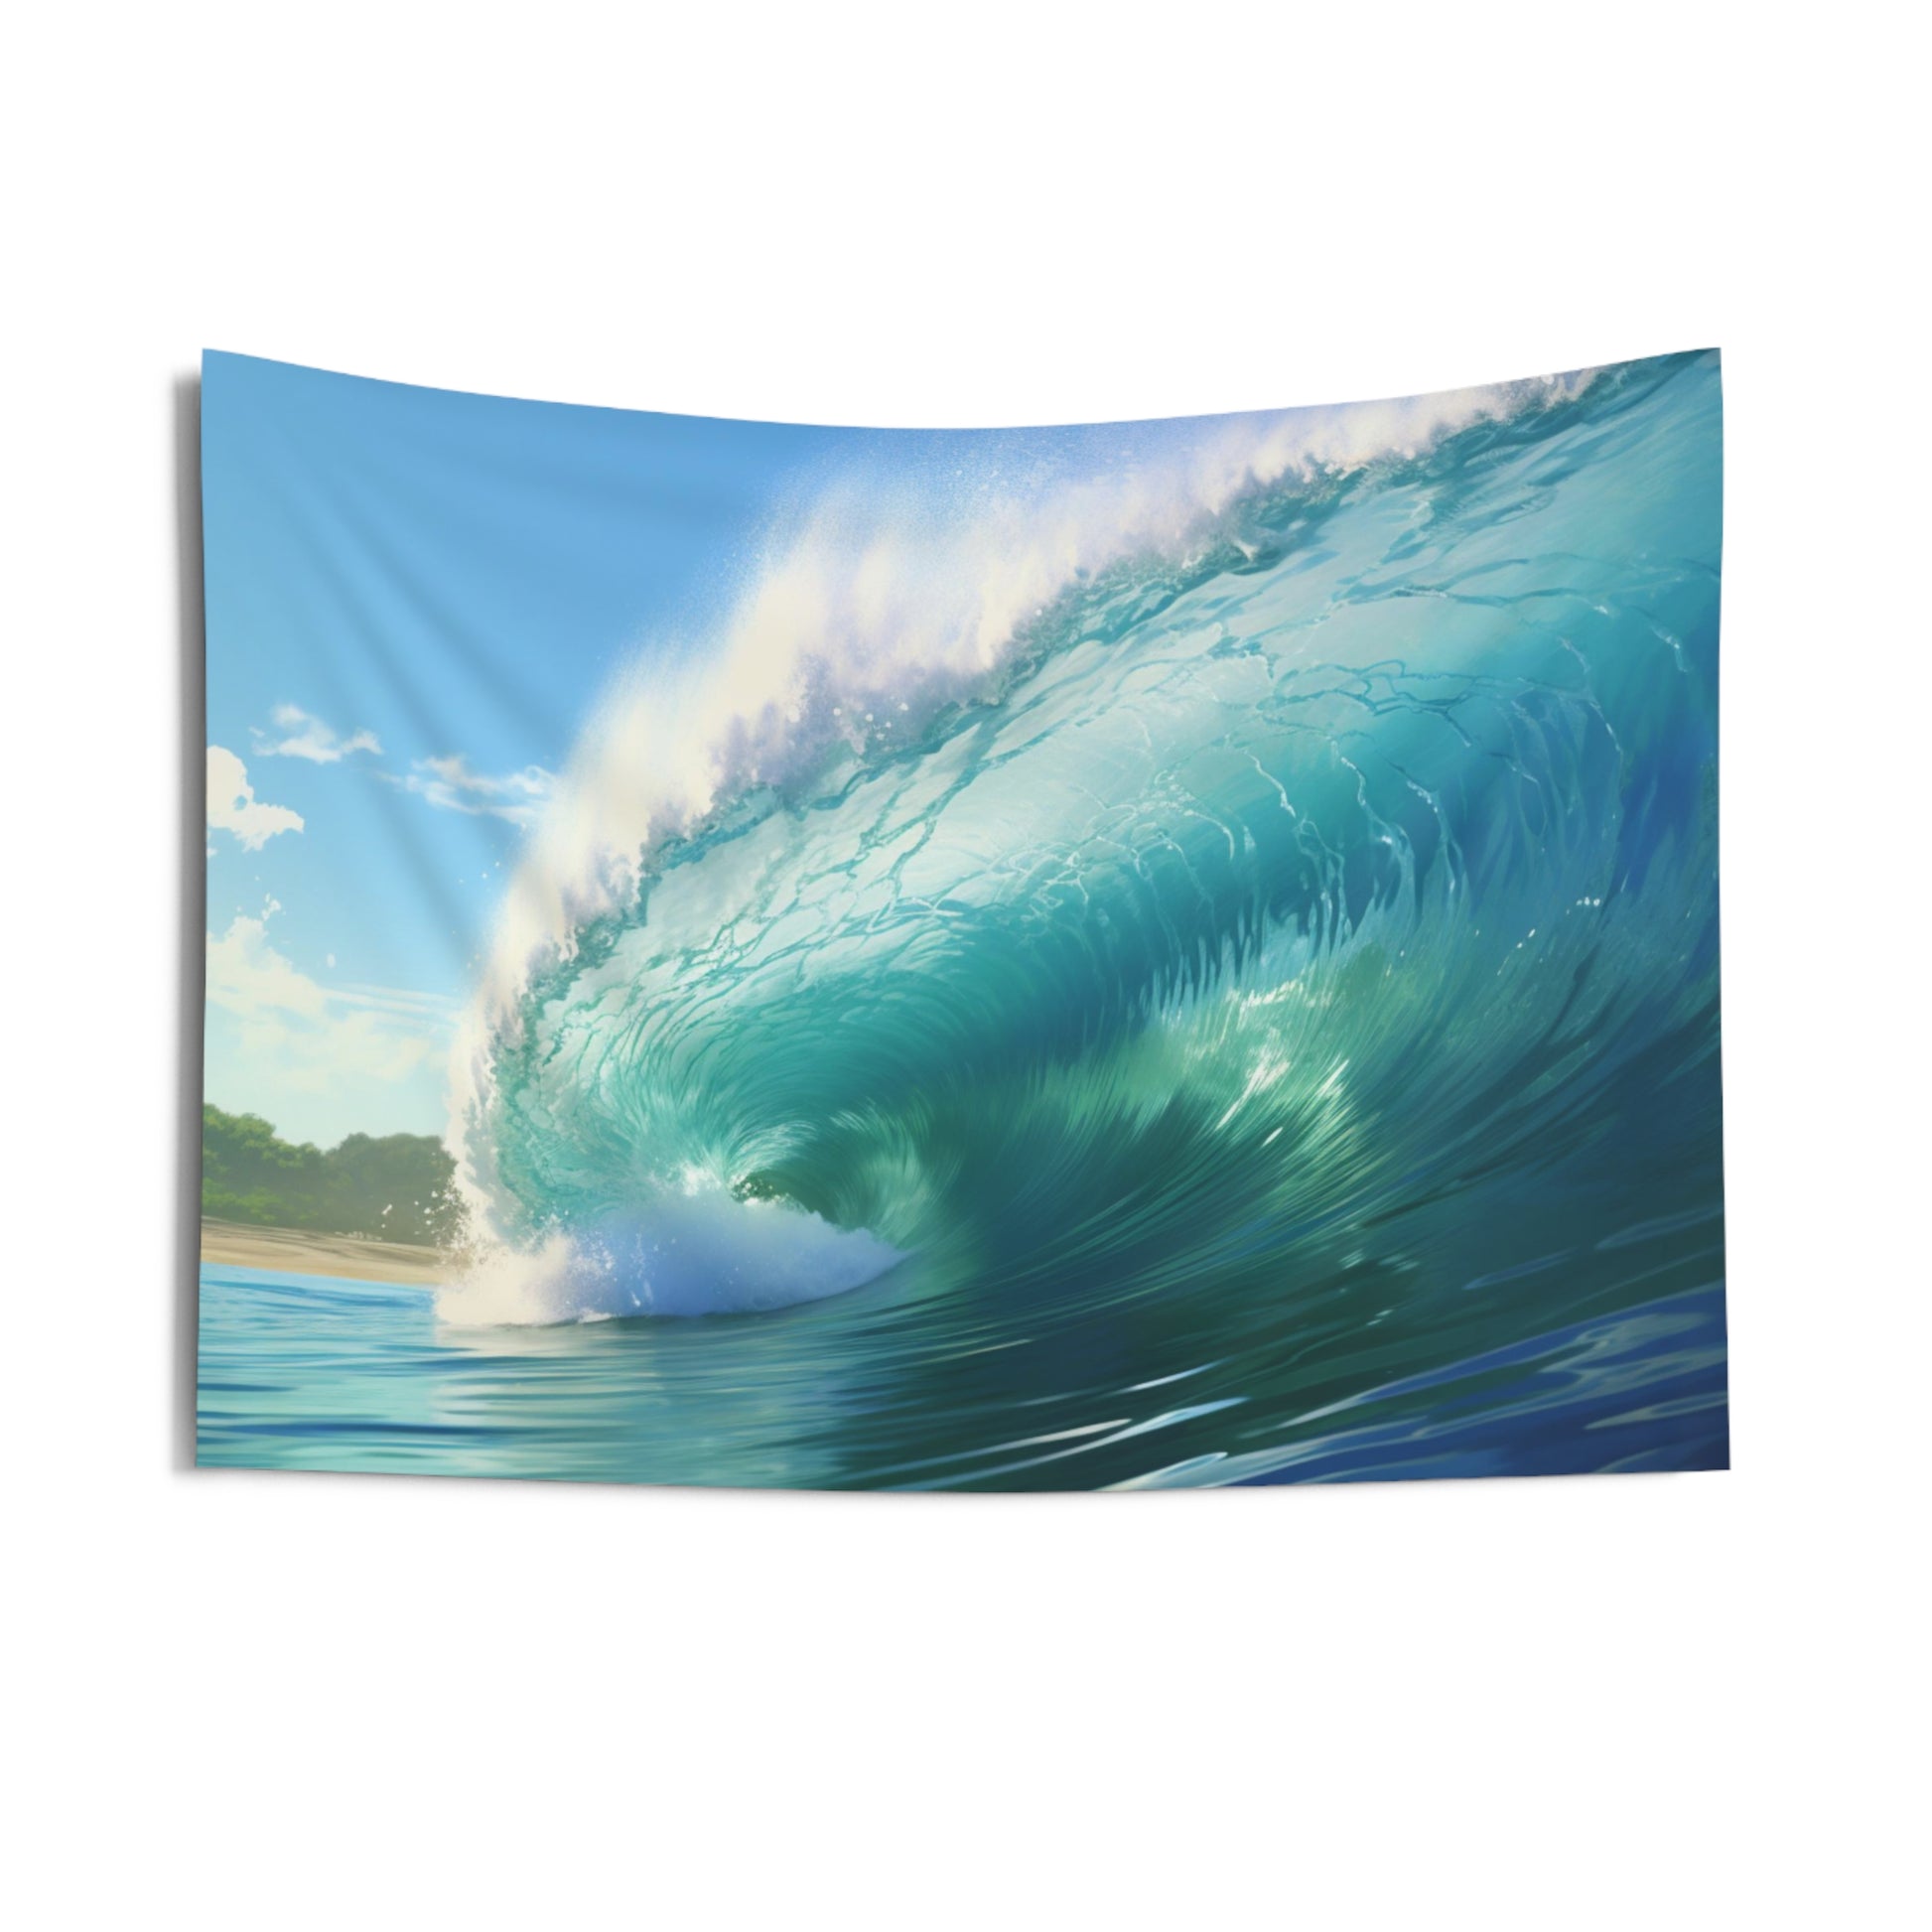 Barrel Wave Tapestry, Ocean Tropical Surf Wall Art Hanging Landscape Indoor Aesthetic Large Small Decor Bedroom College Dorm Room Starcove Fashion